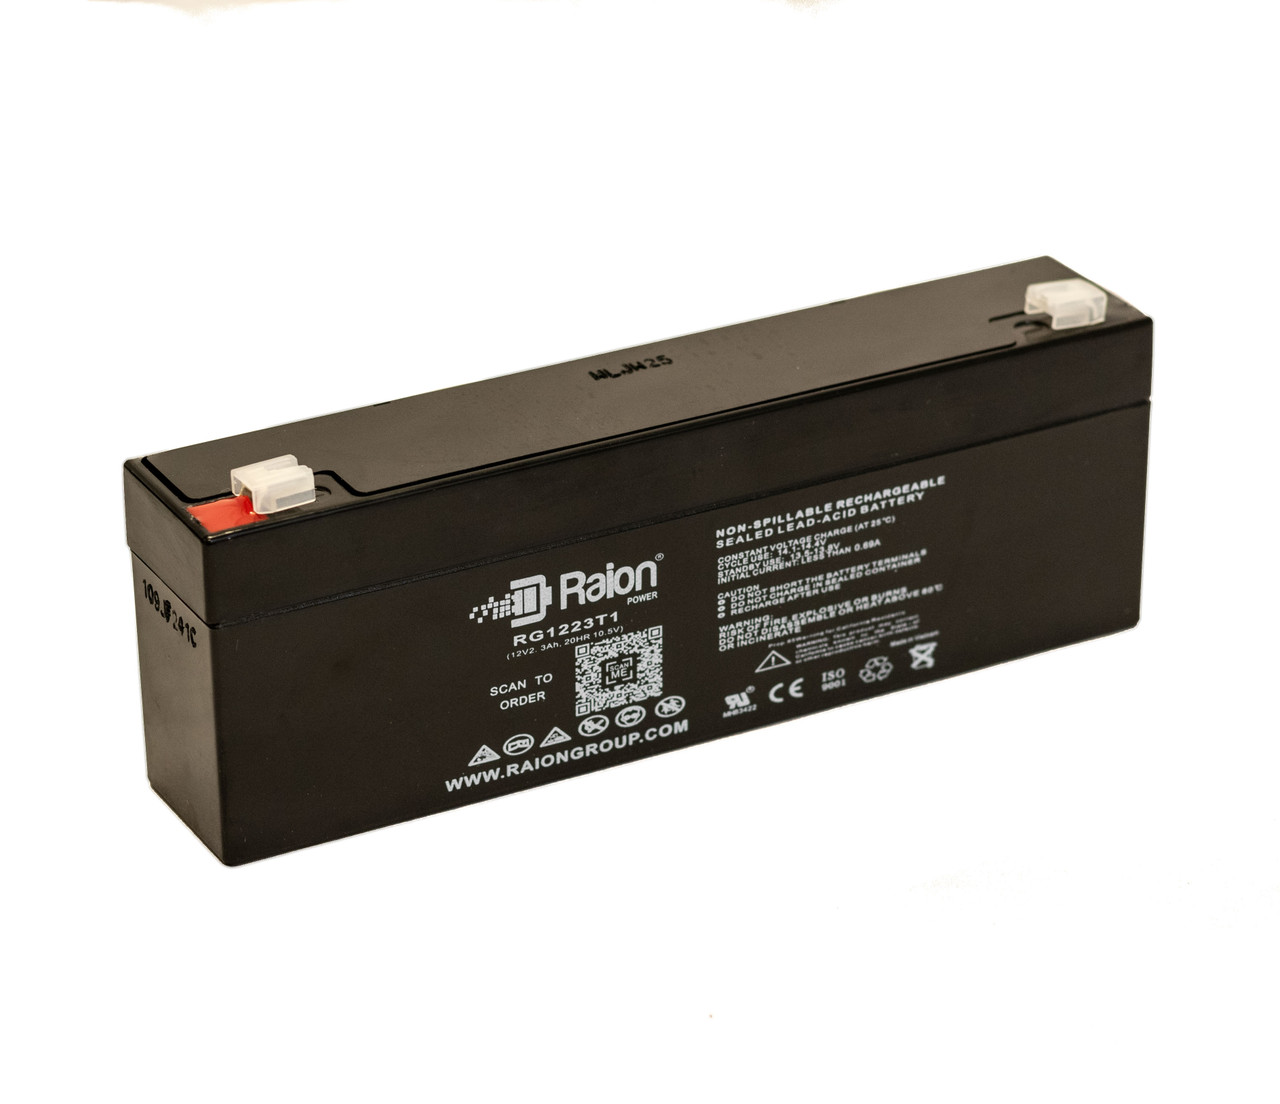 Raion Power RG1223T1 Replacement Battery for Johnson Control GC1215